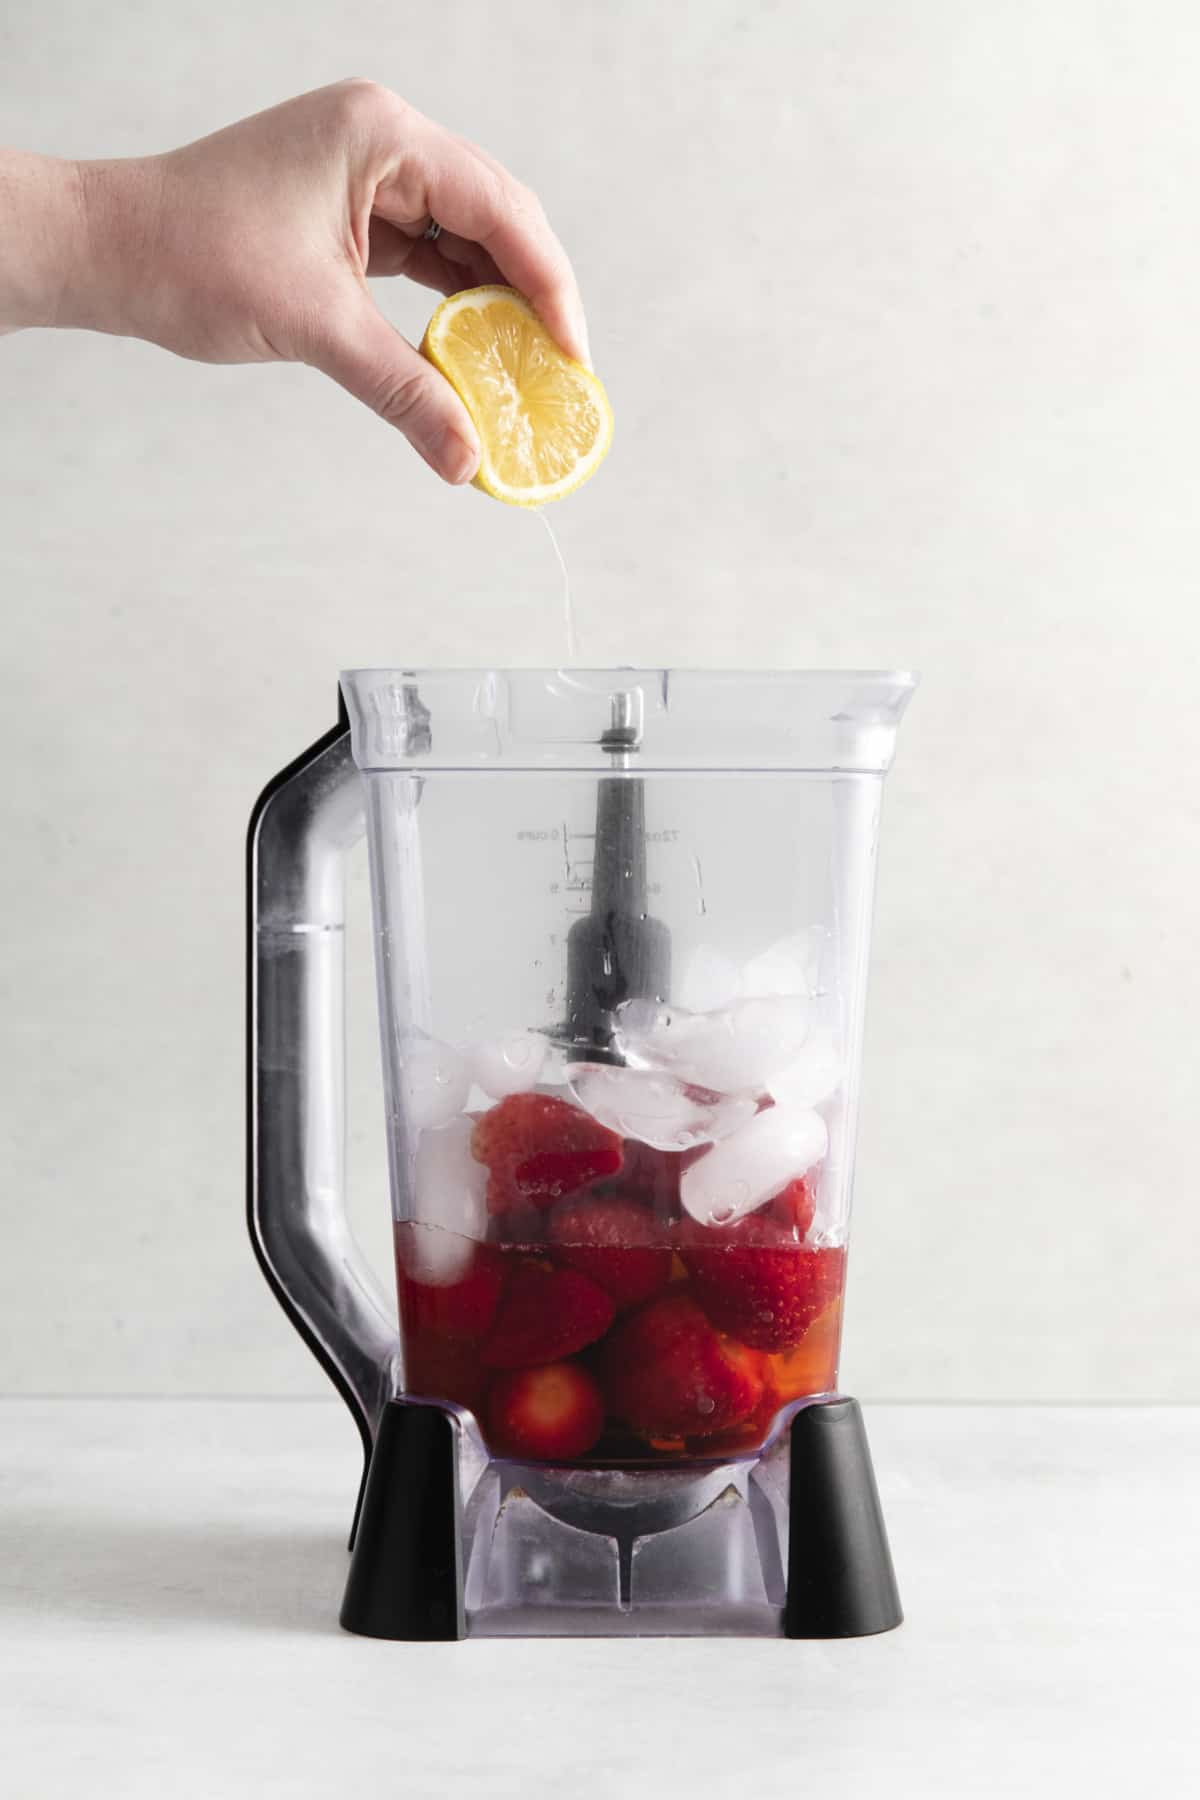 fresh lemon being squeezed into a blender with strawberries and ice.